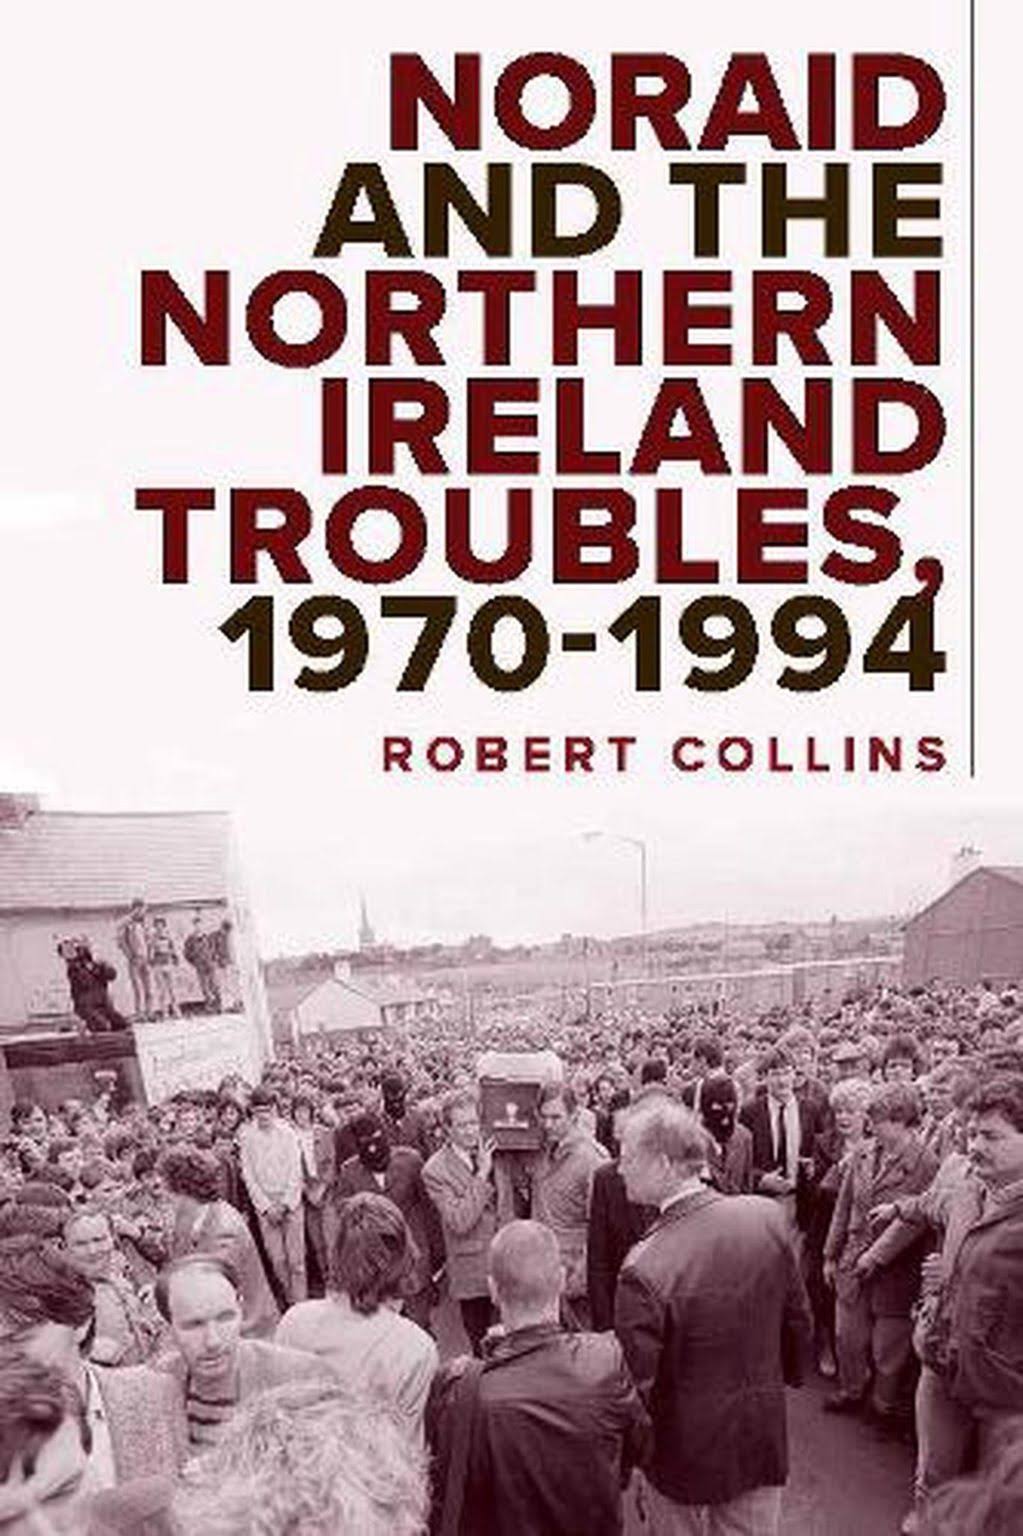 Noraid and the Northern Ireland Troubles, 1970-1994 [Book]